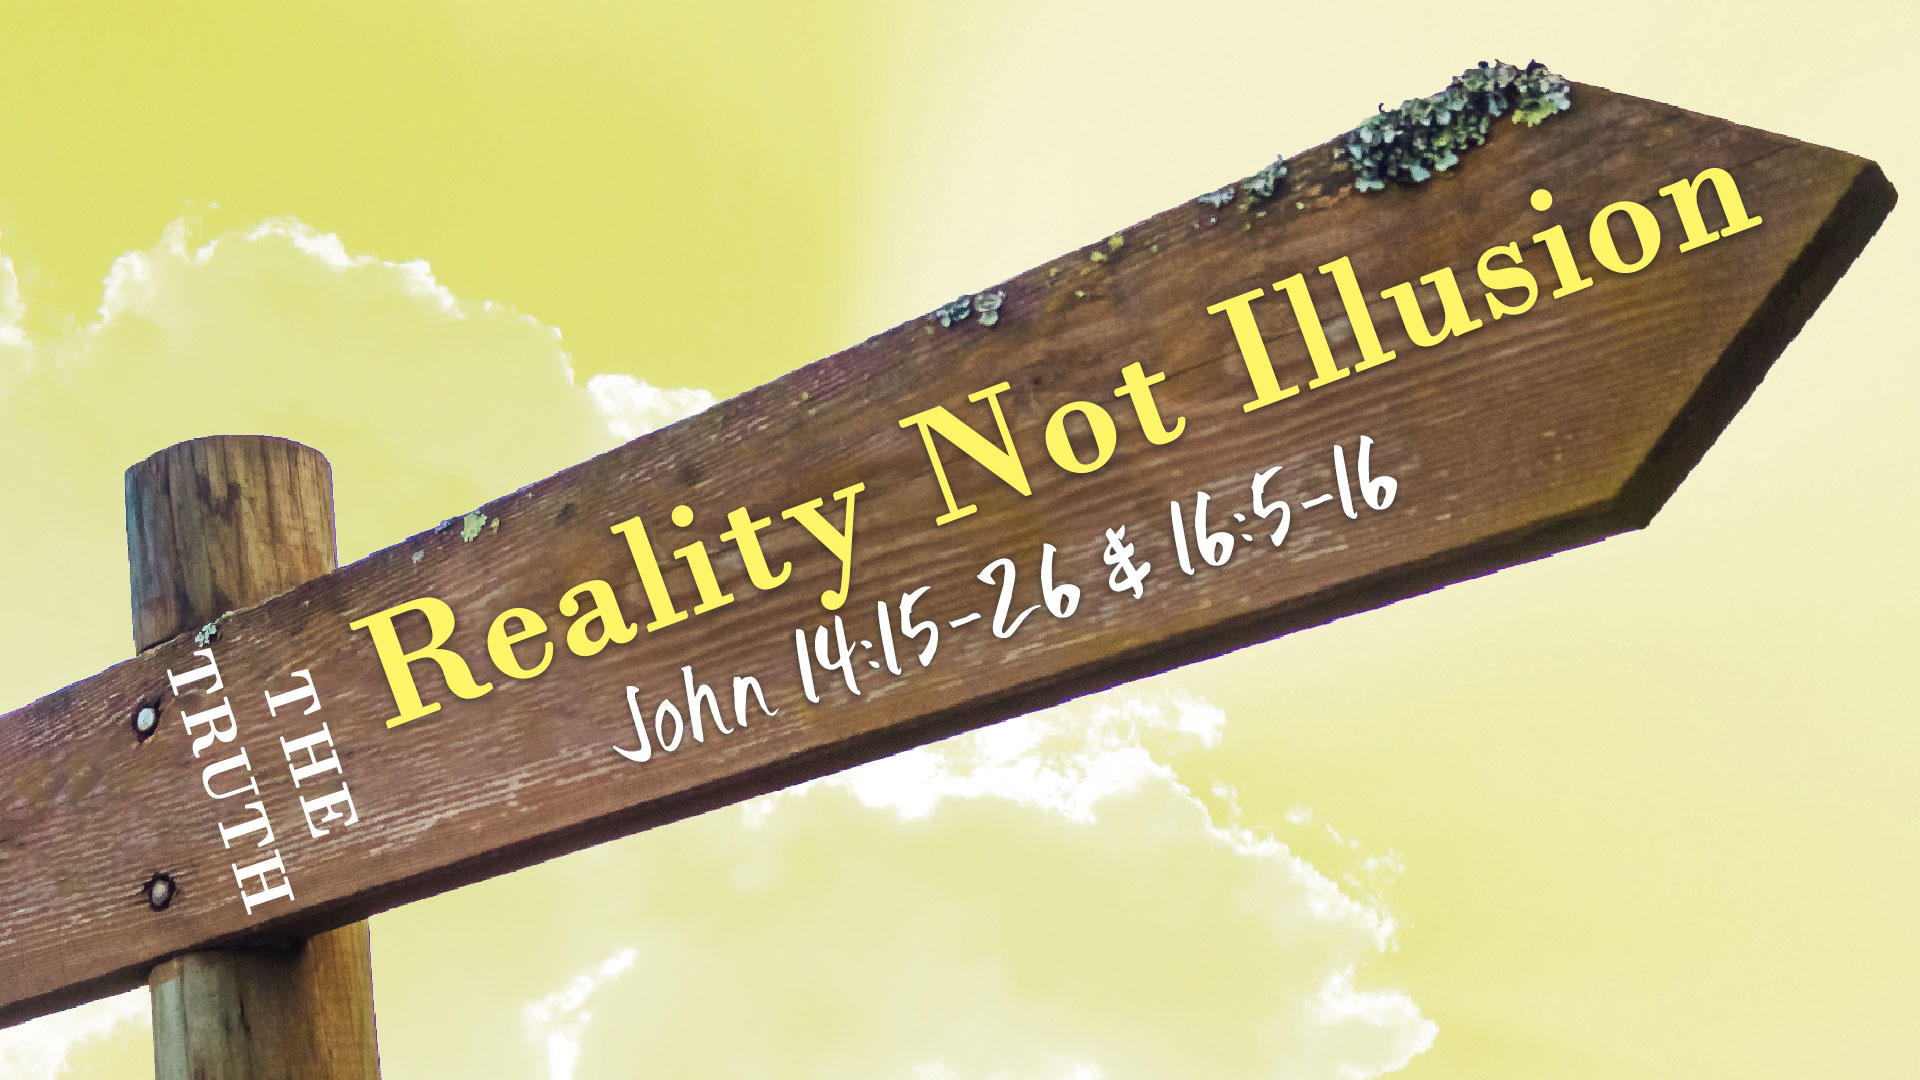 The Truth, part 1: Reality Not Illusion  Image